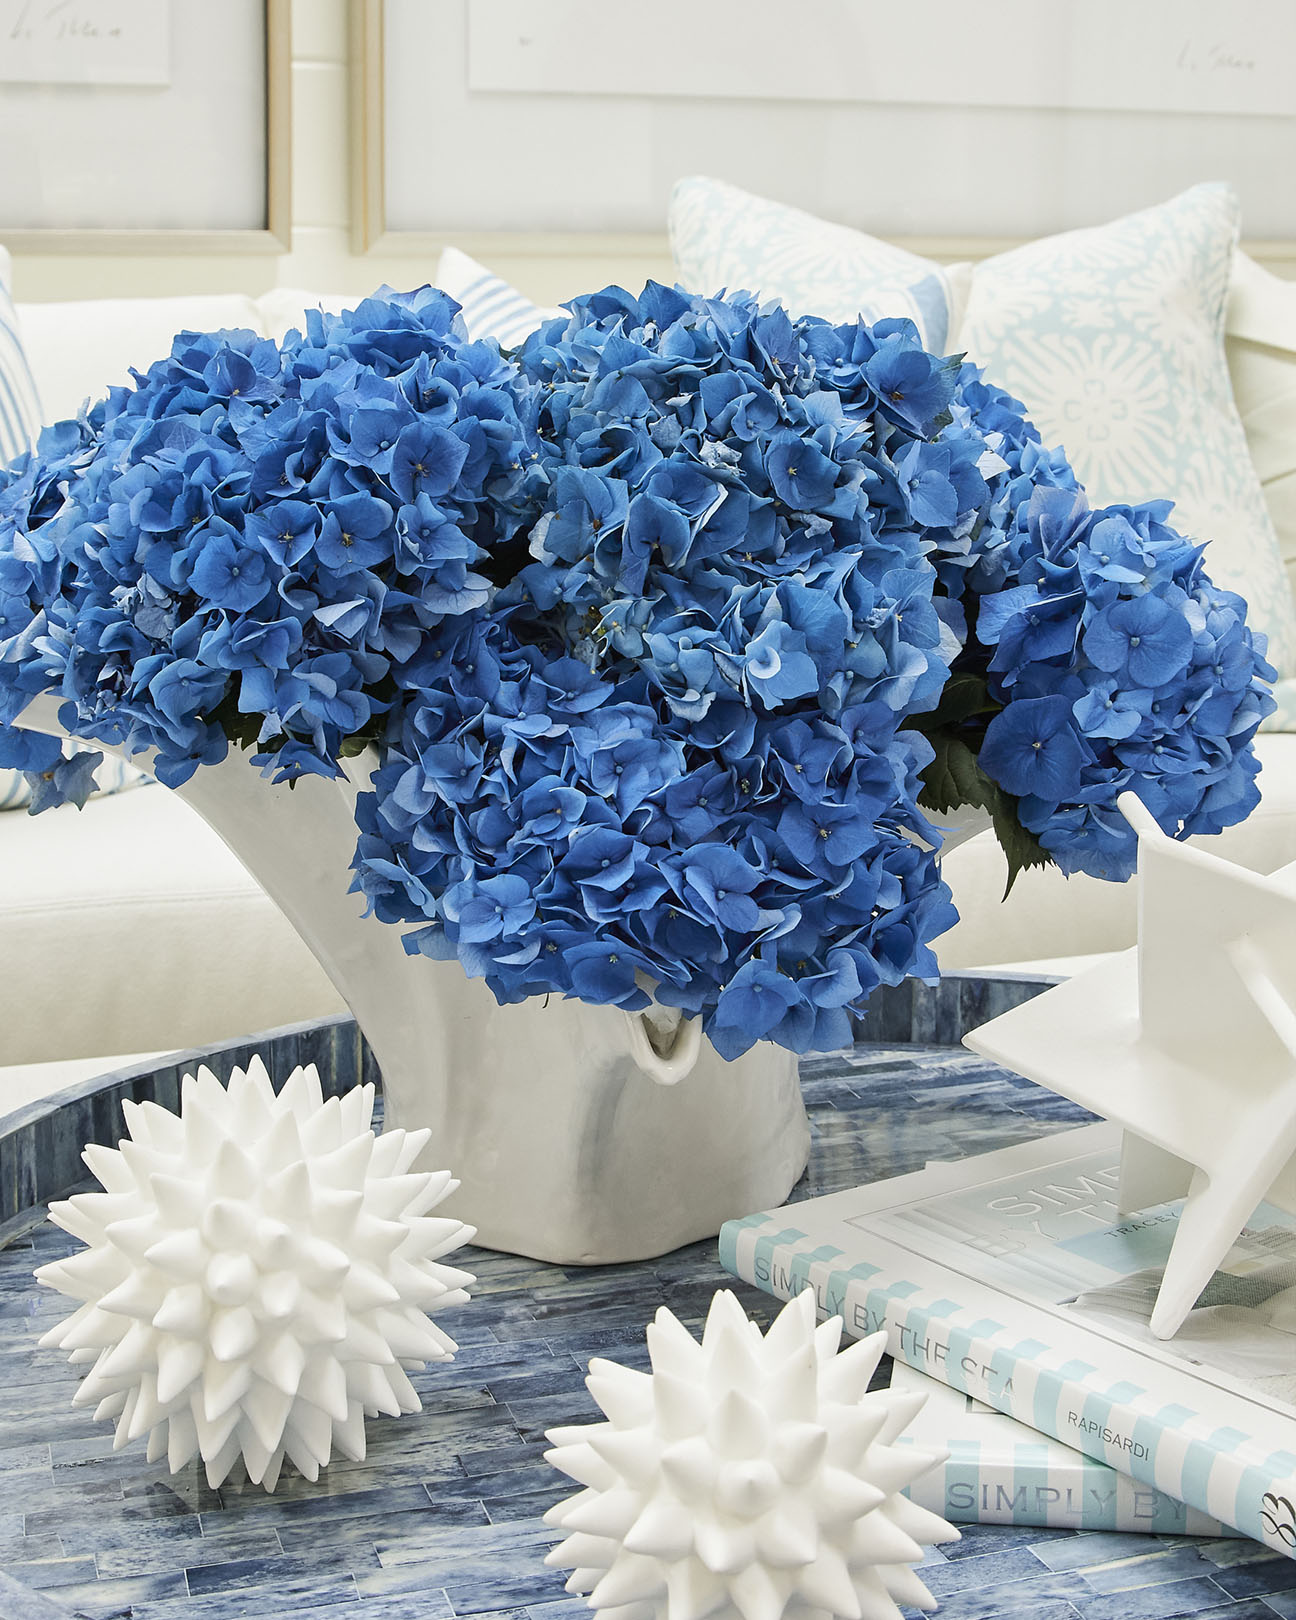 A white ceramic vase with deep blue hydrangeas arranged by Renny & Reed.